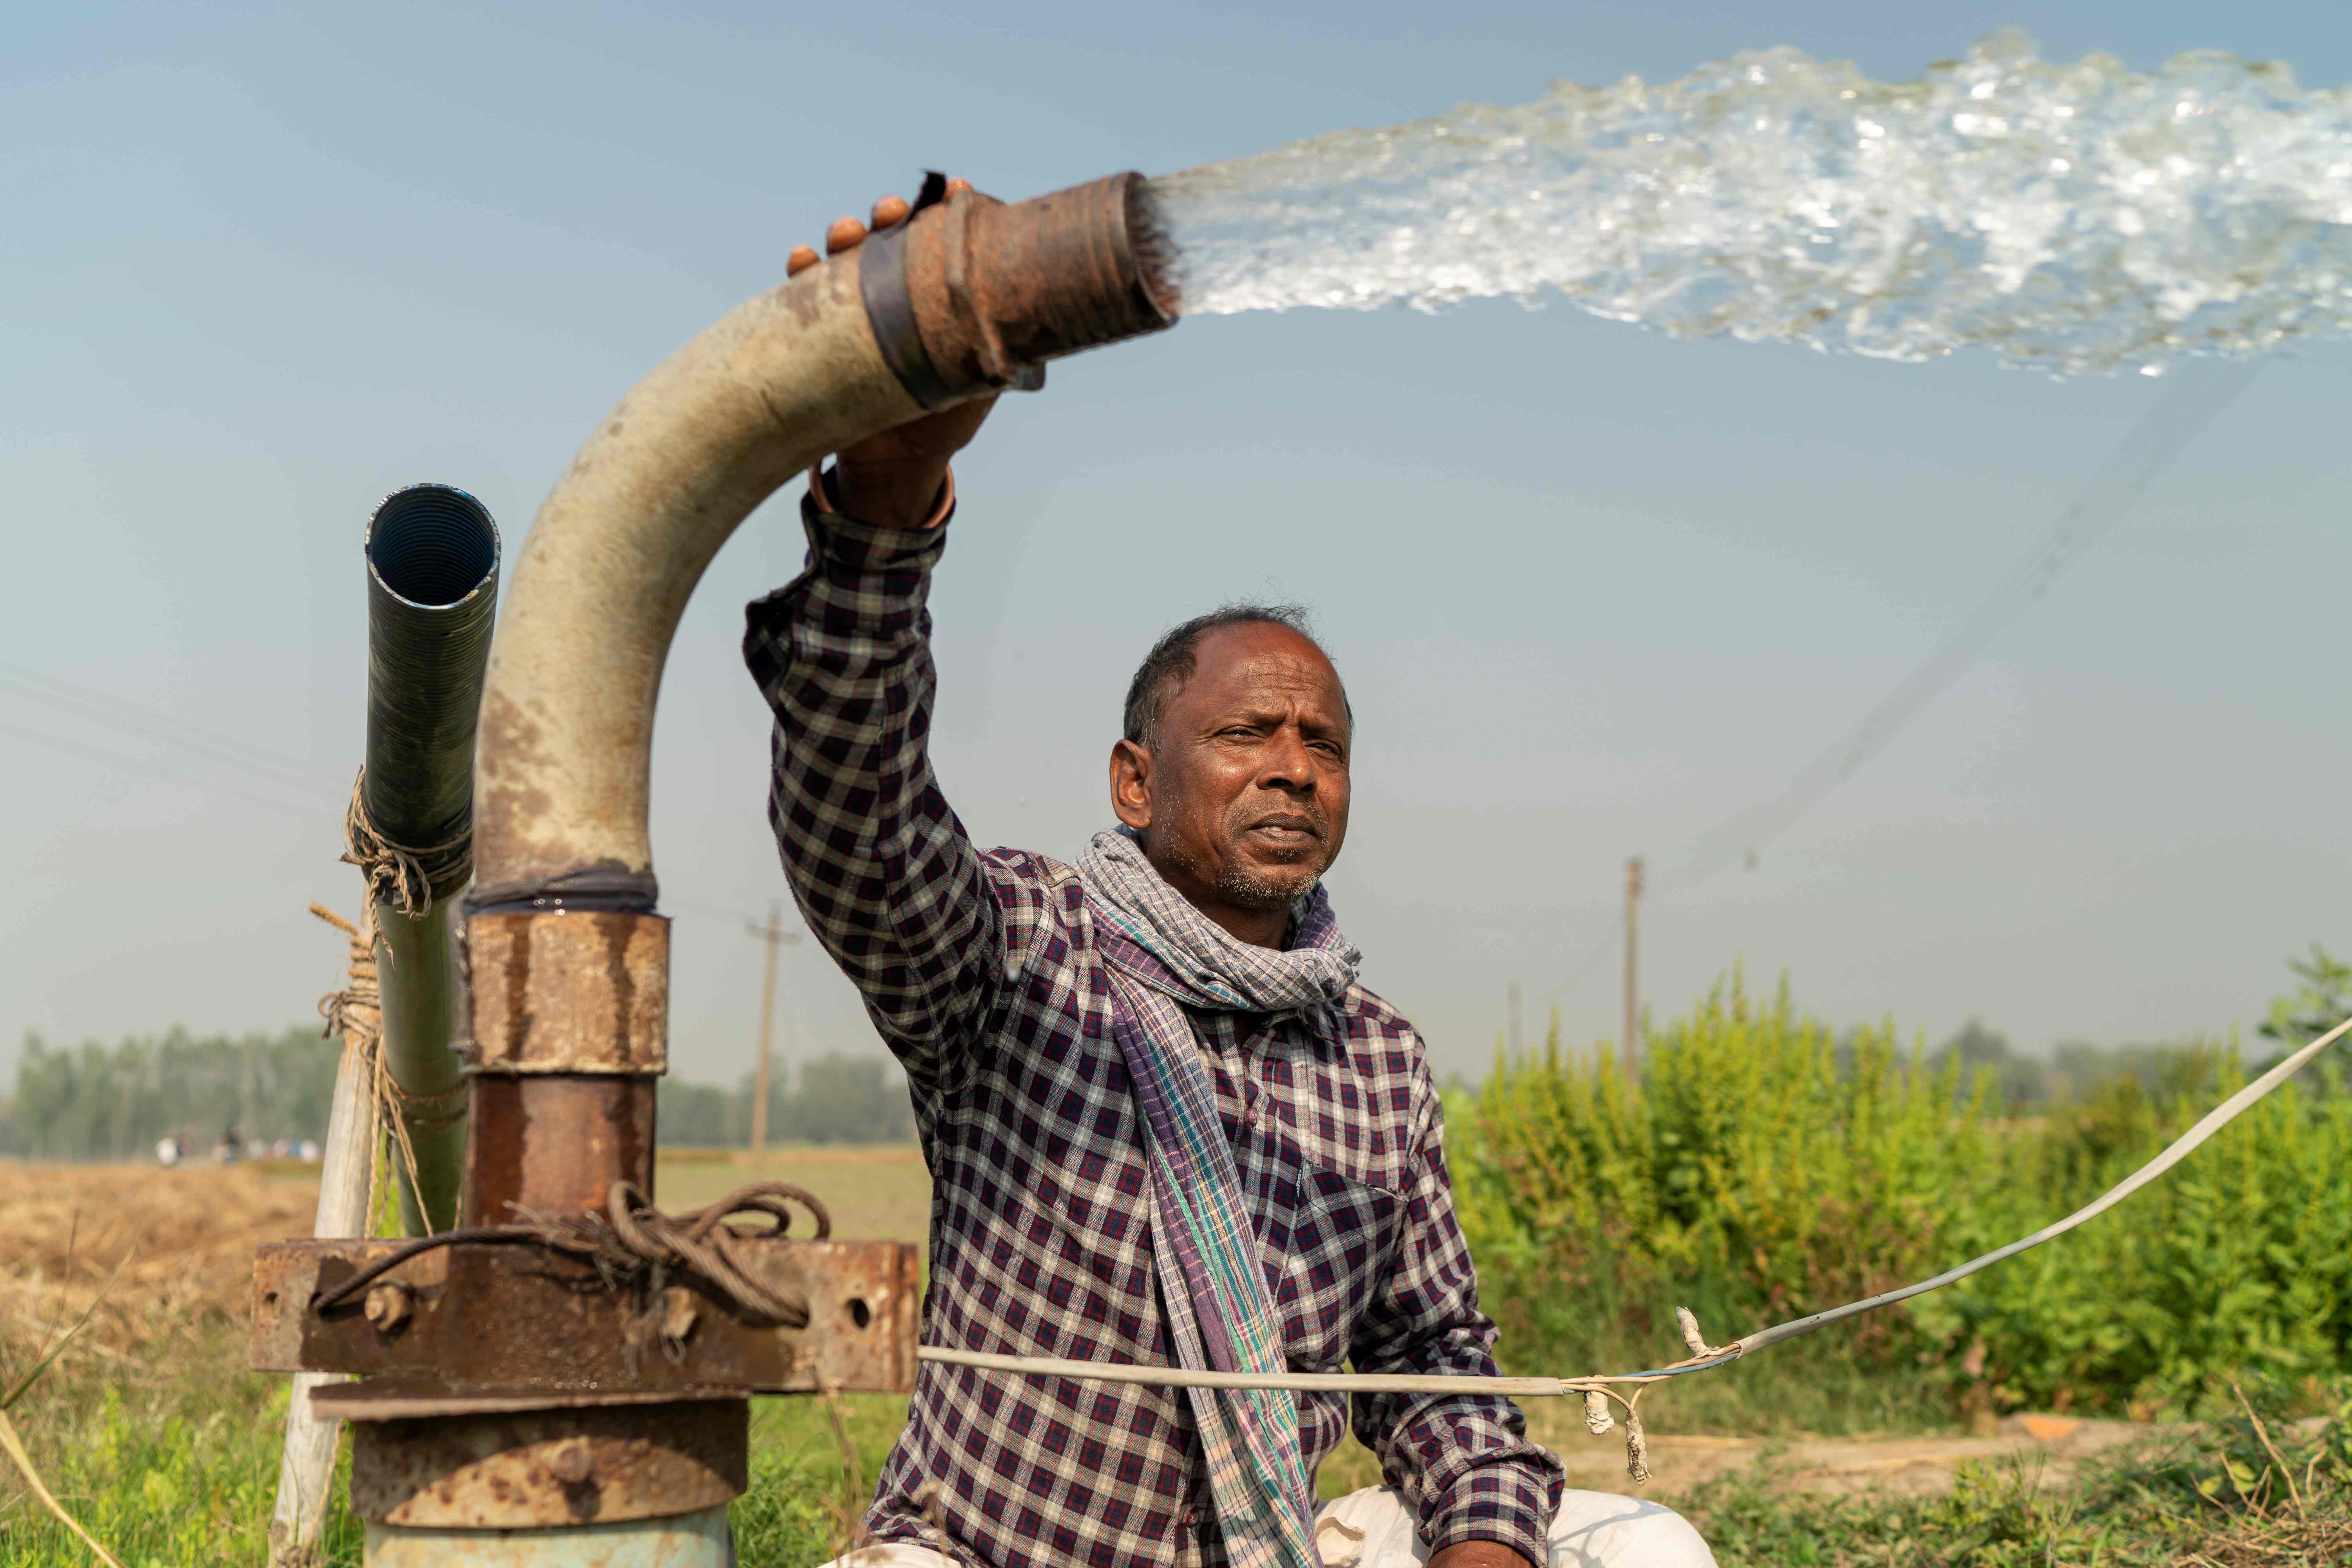 Man holding a water pump that is spraying water onto crops